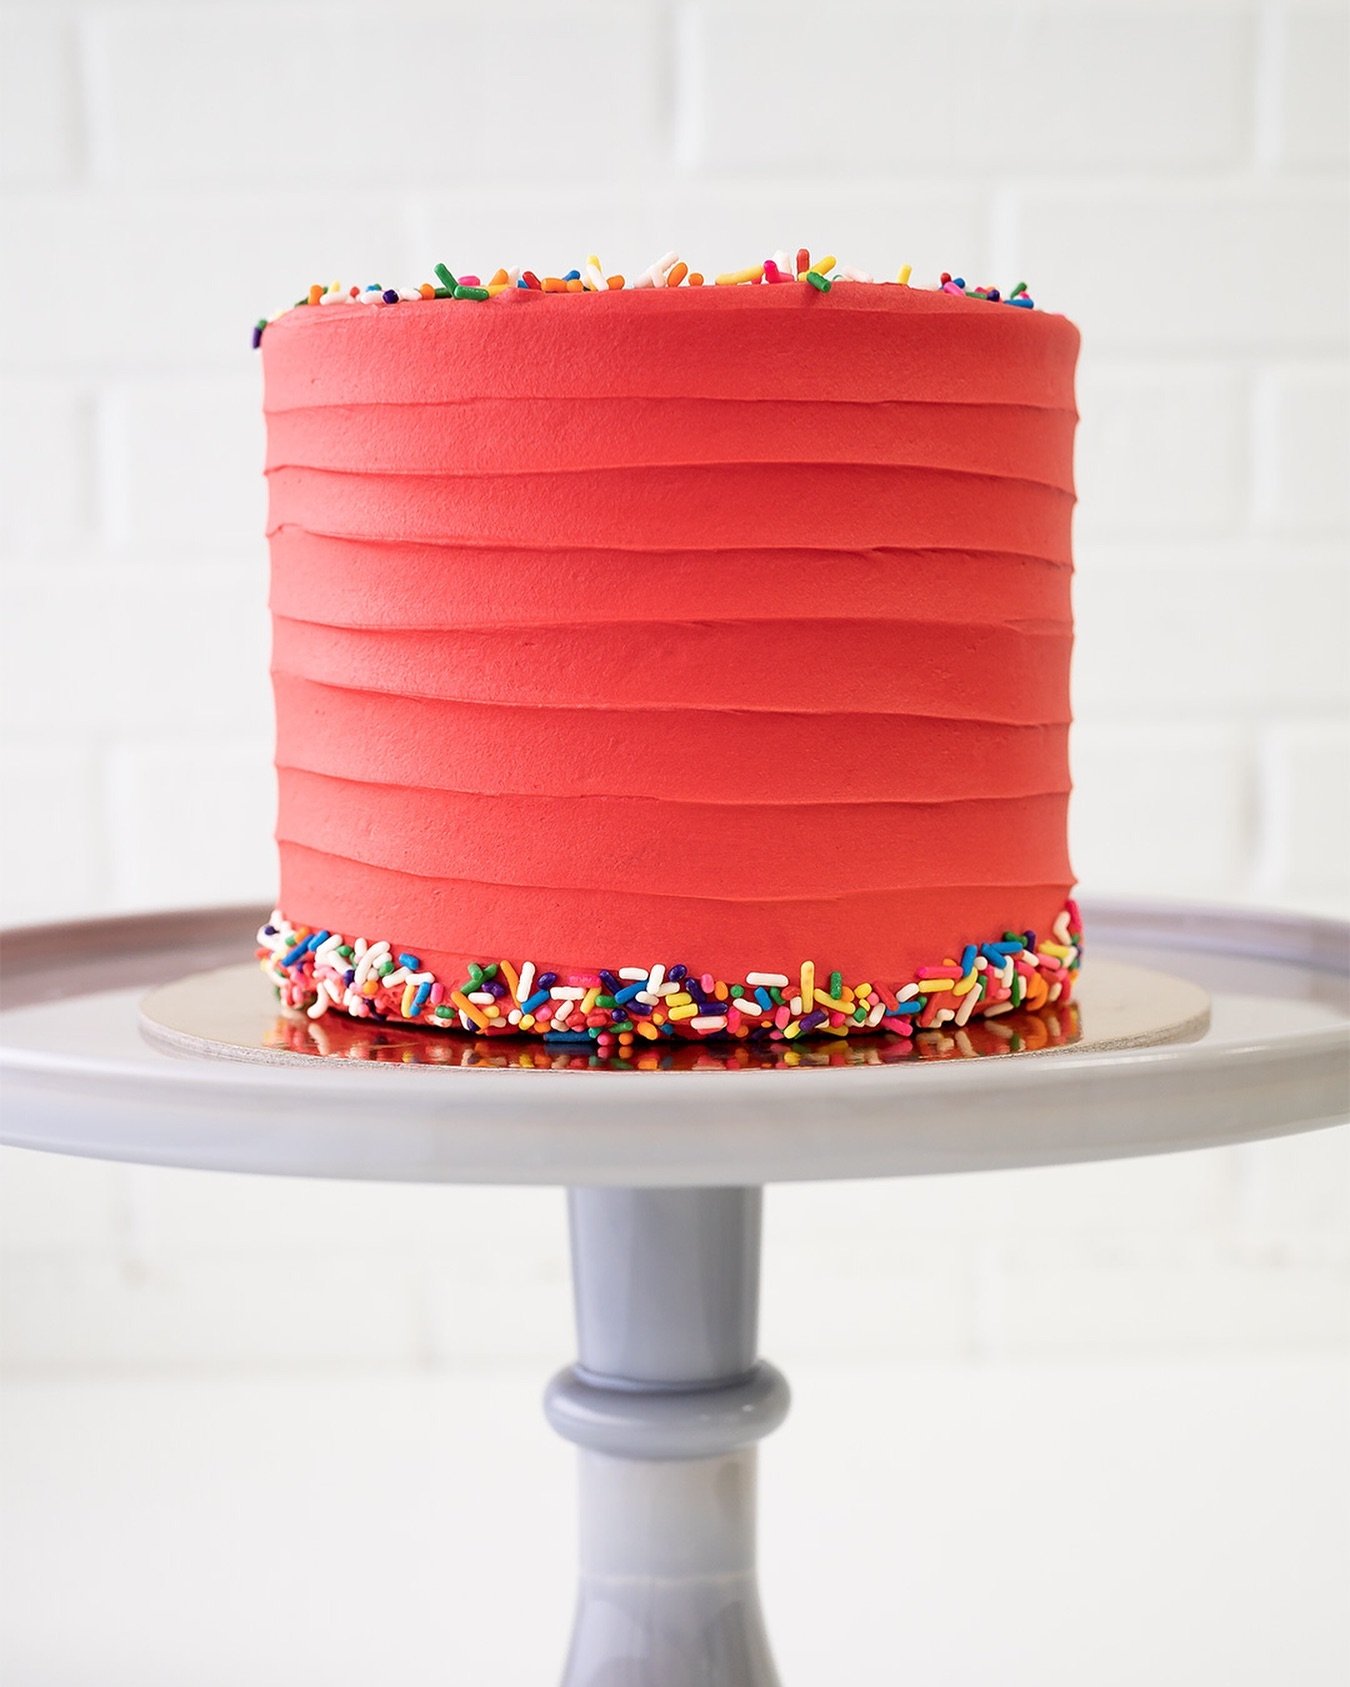 6&rdquo; Spatula Sides Cake in Red ❤️🎂🎉 See all our Made-to-Order Cake flavors, designs, and colors at the bio link.